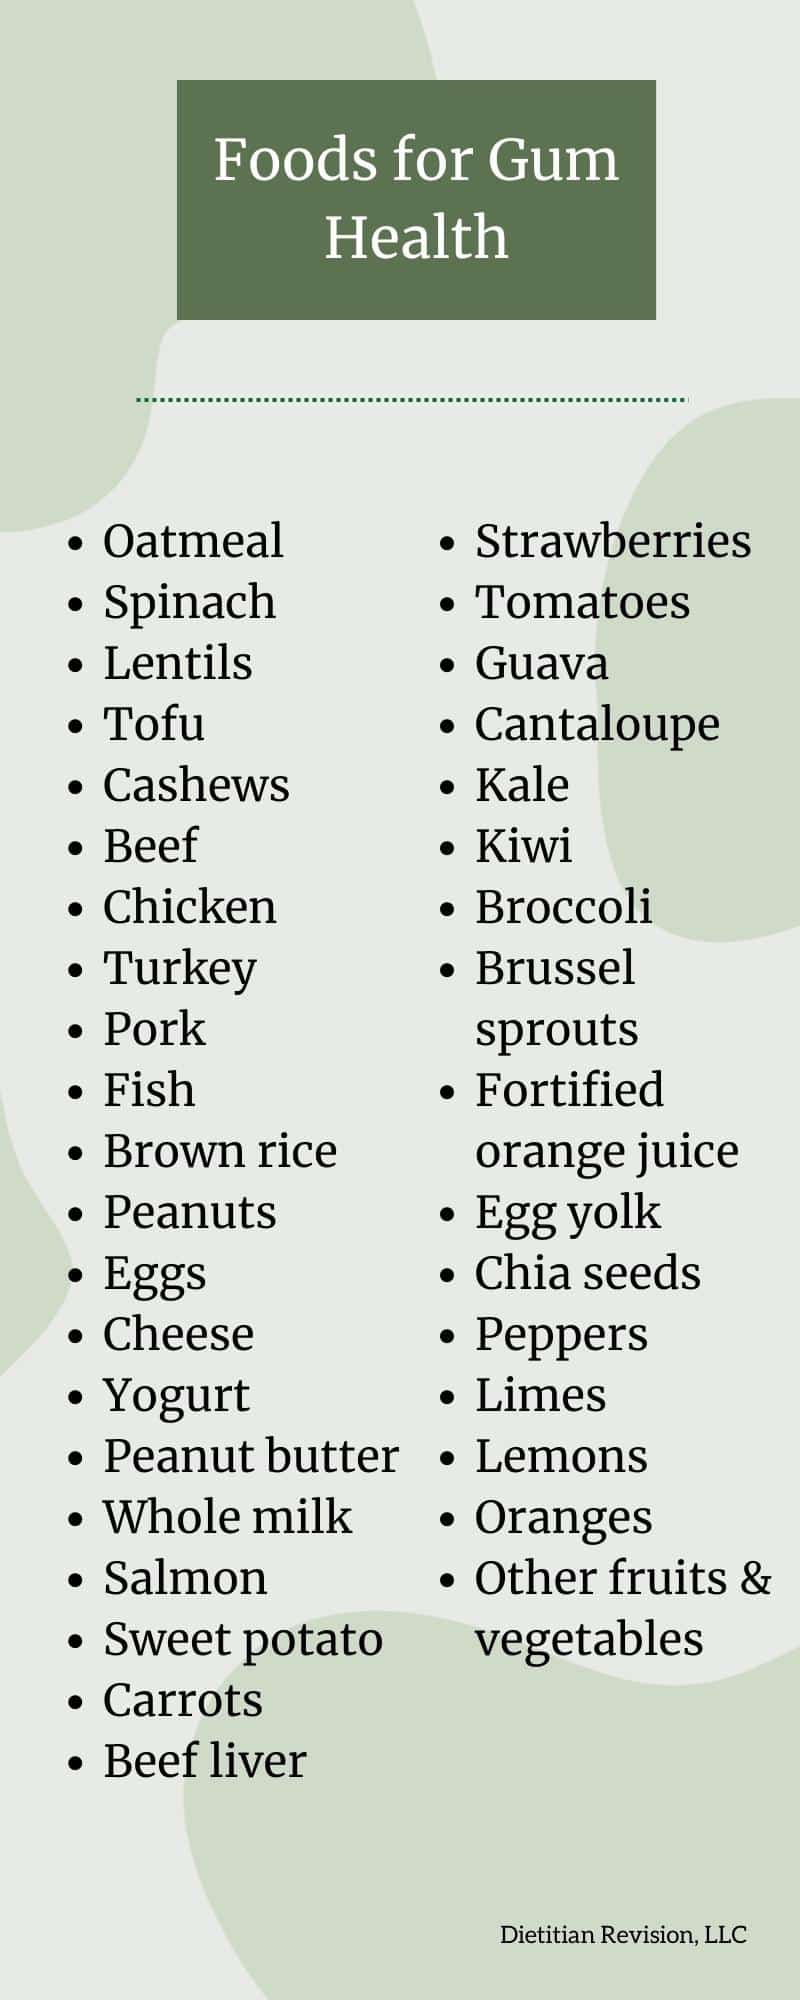 List of foods for gum health.